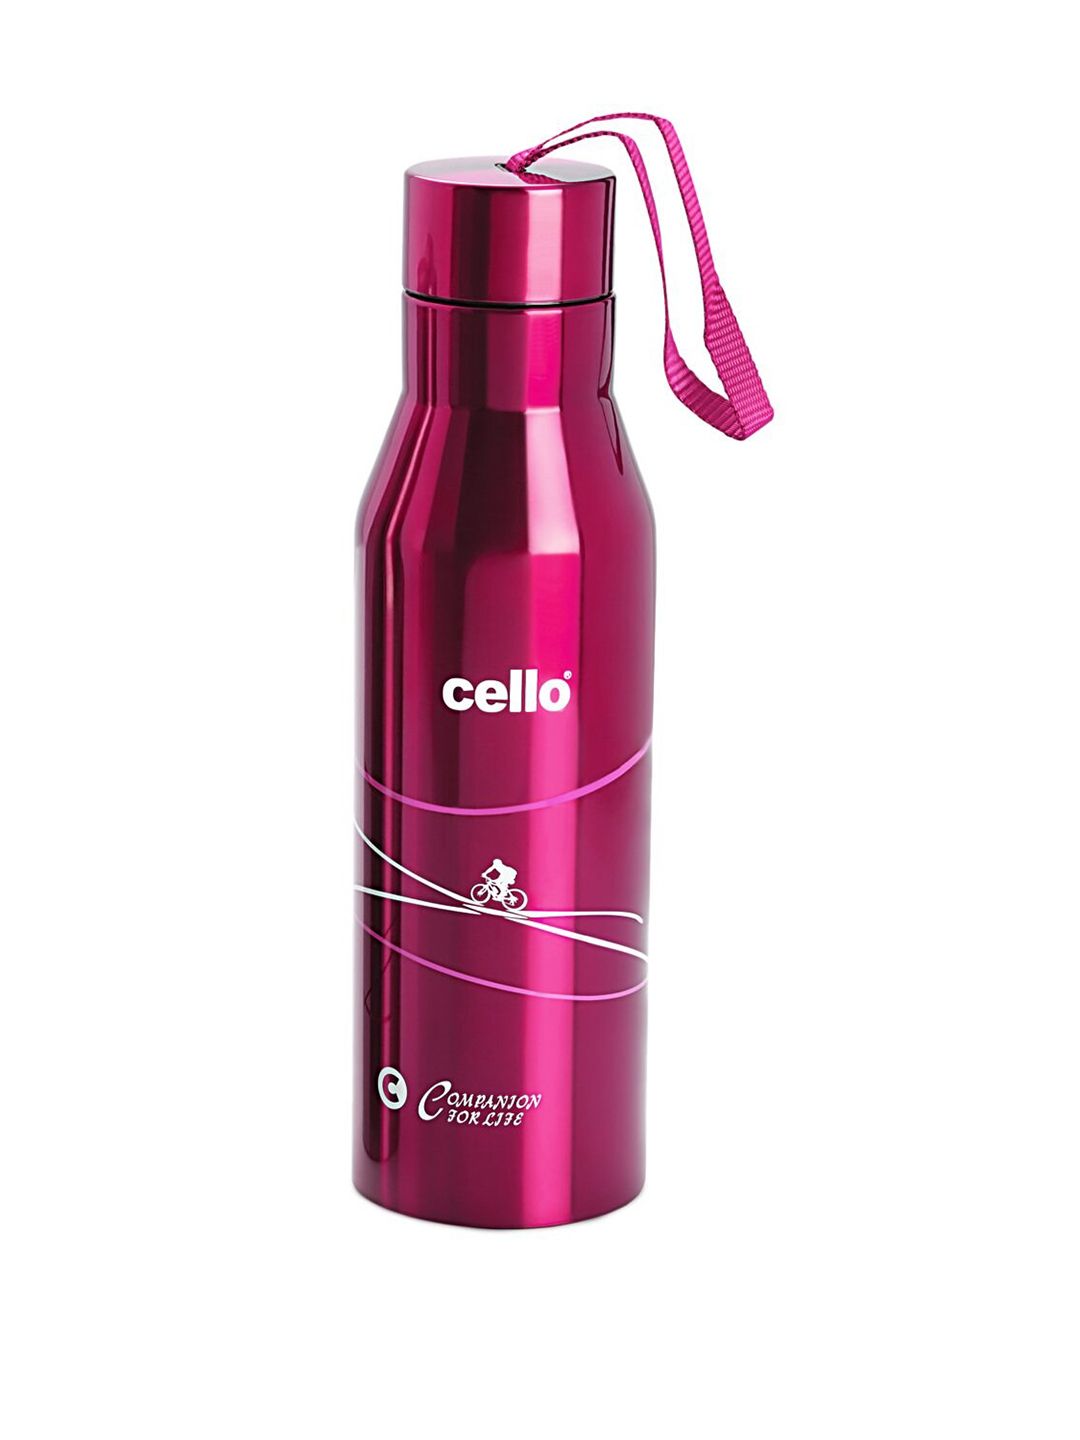 Cello Pink Printed Stainless Steel Water Bottle 900ml Price in India